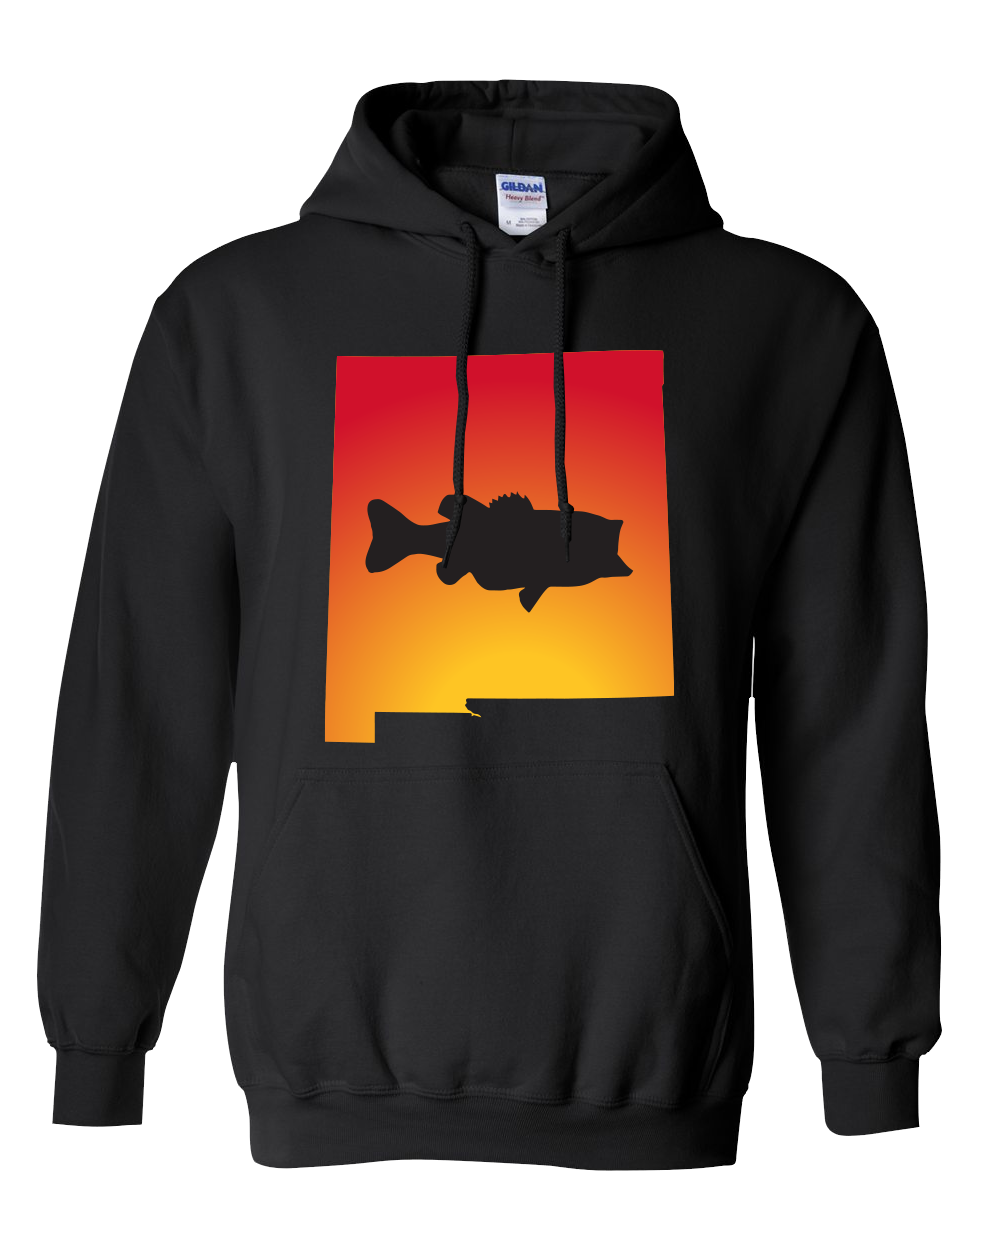 Pullover Hooded Sweatshirt New Mexico Black Large Mouth Bass Vibrant Design High Quality Tight Knit Ring Spun Low Maintenance Cotton Printed With The Newest Available Color Transfer Technology